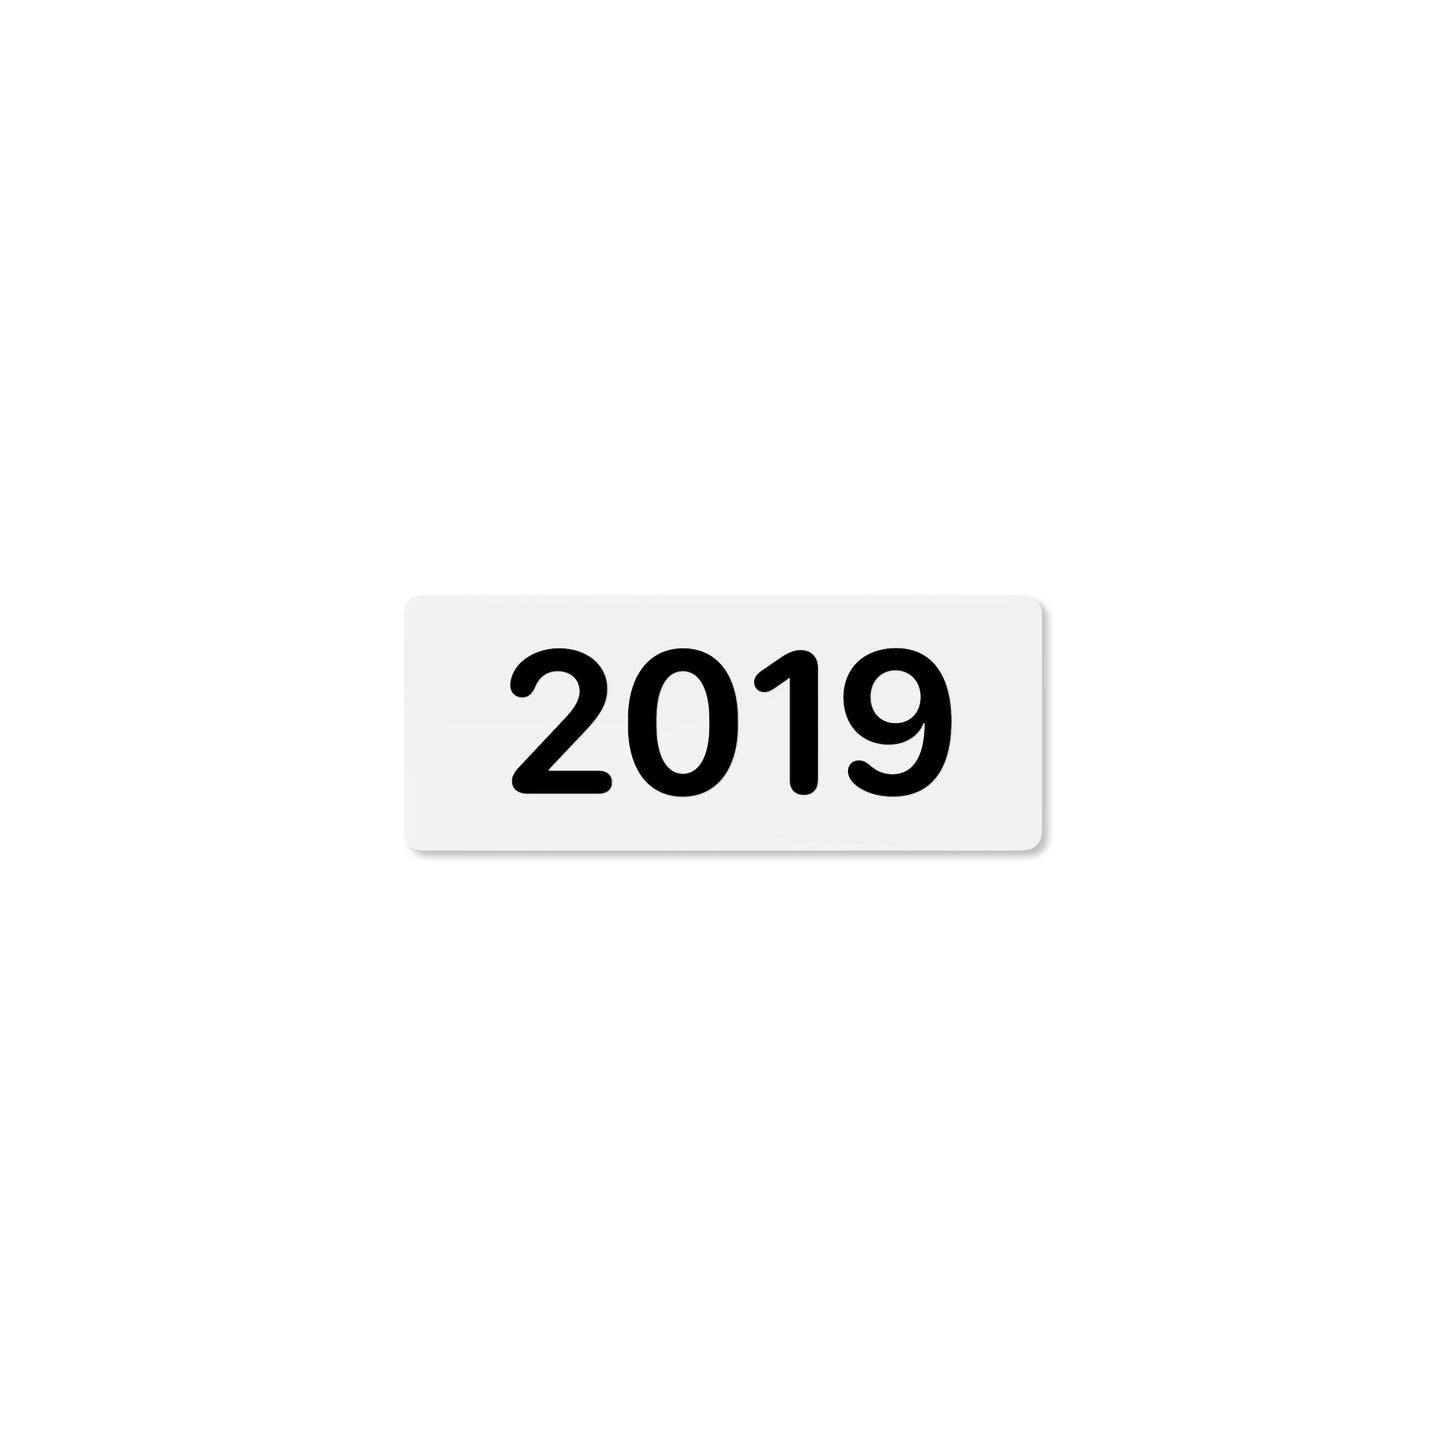 Numeral 2019